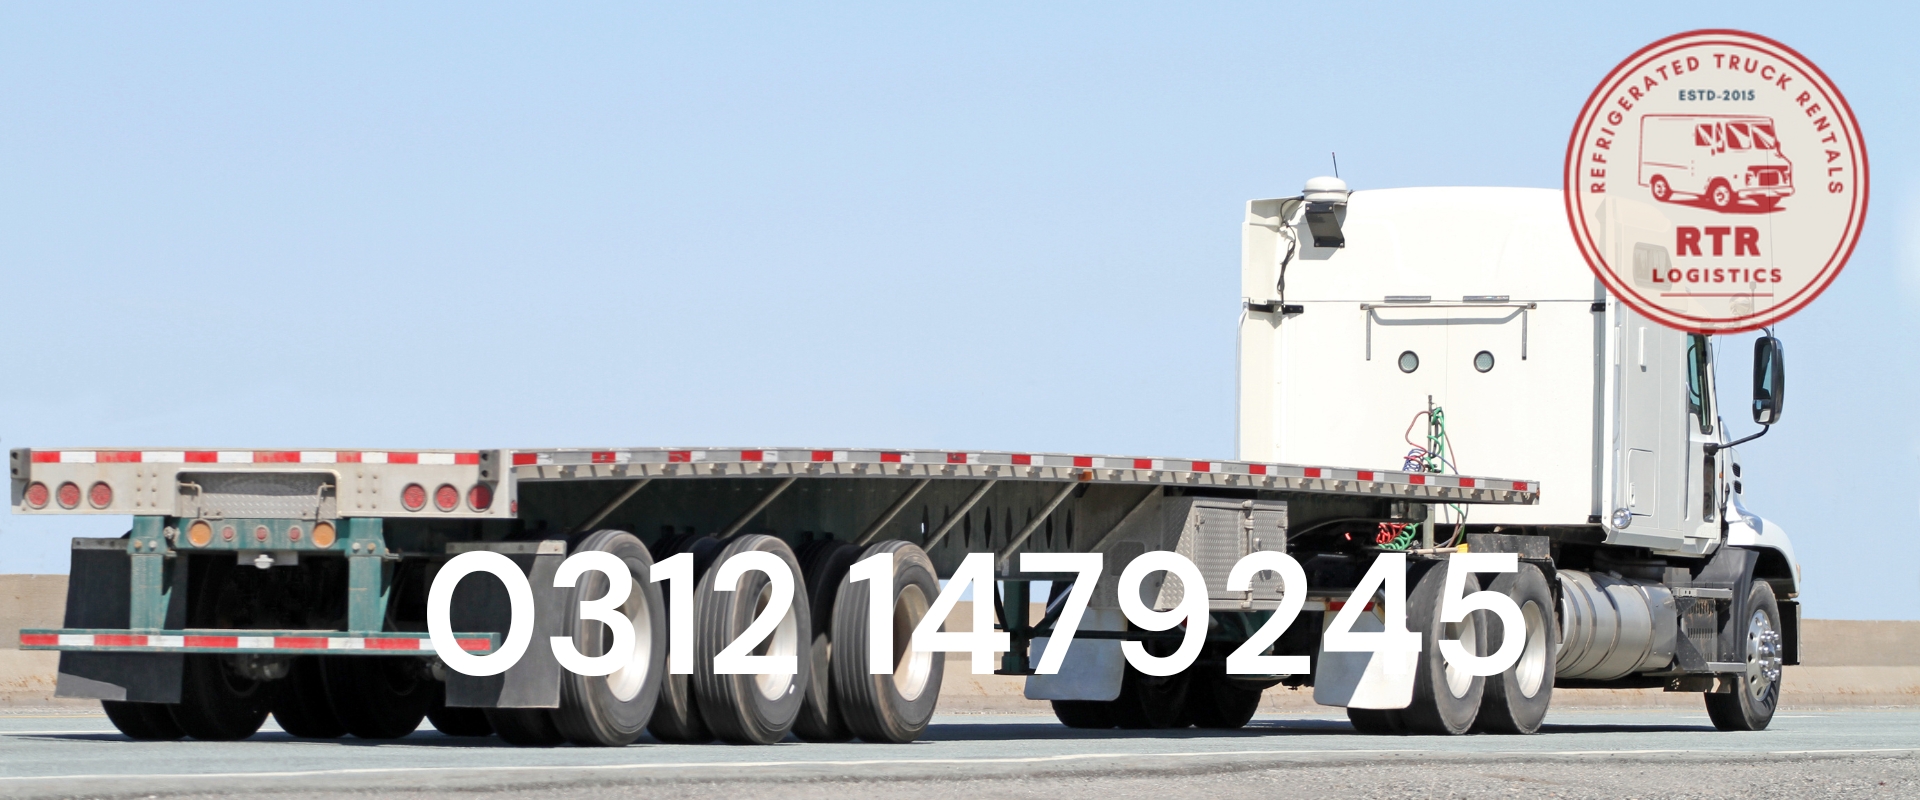 Flatbed Truck Rental Services - Flatbed Trailer On Rent in Pakistan